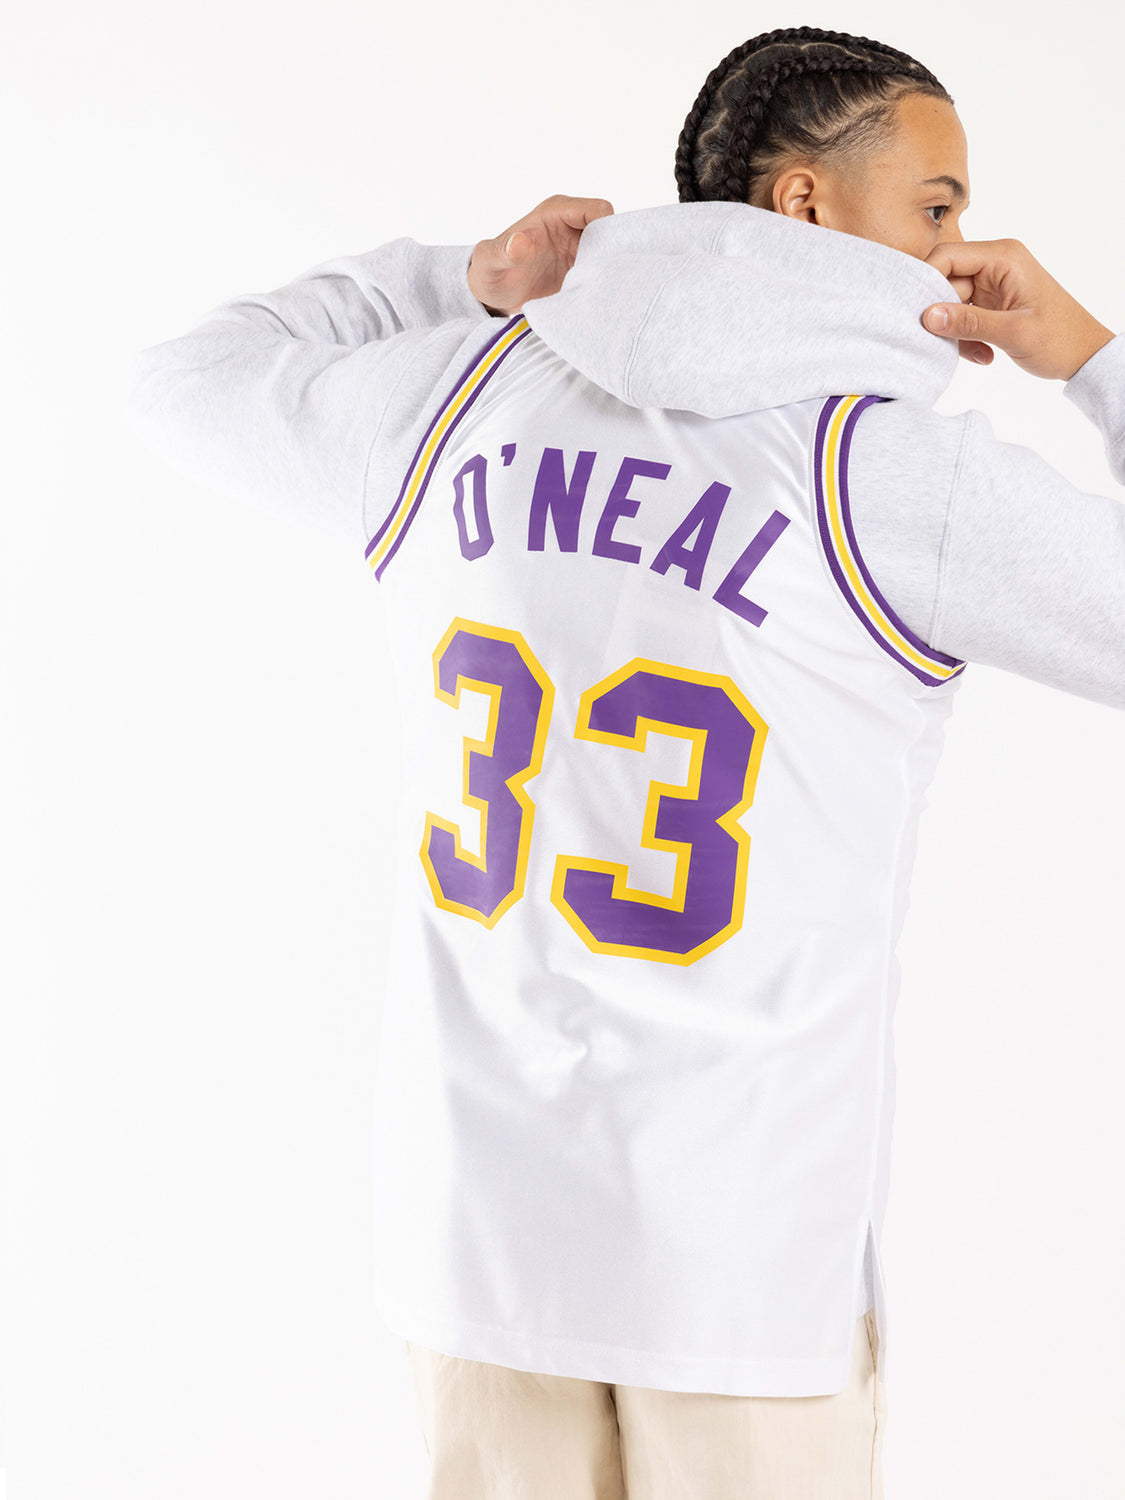 Mitchell & Ness Authentic Shaquille O'Neal Louisiana State University 1990-91 Jersey